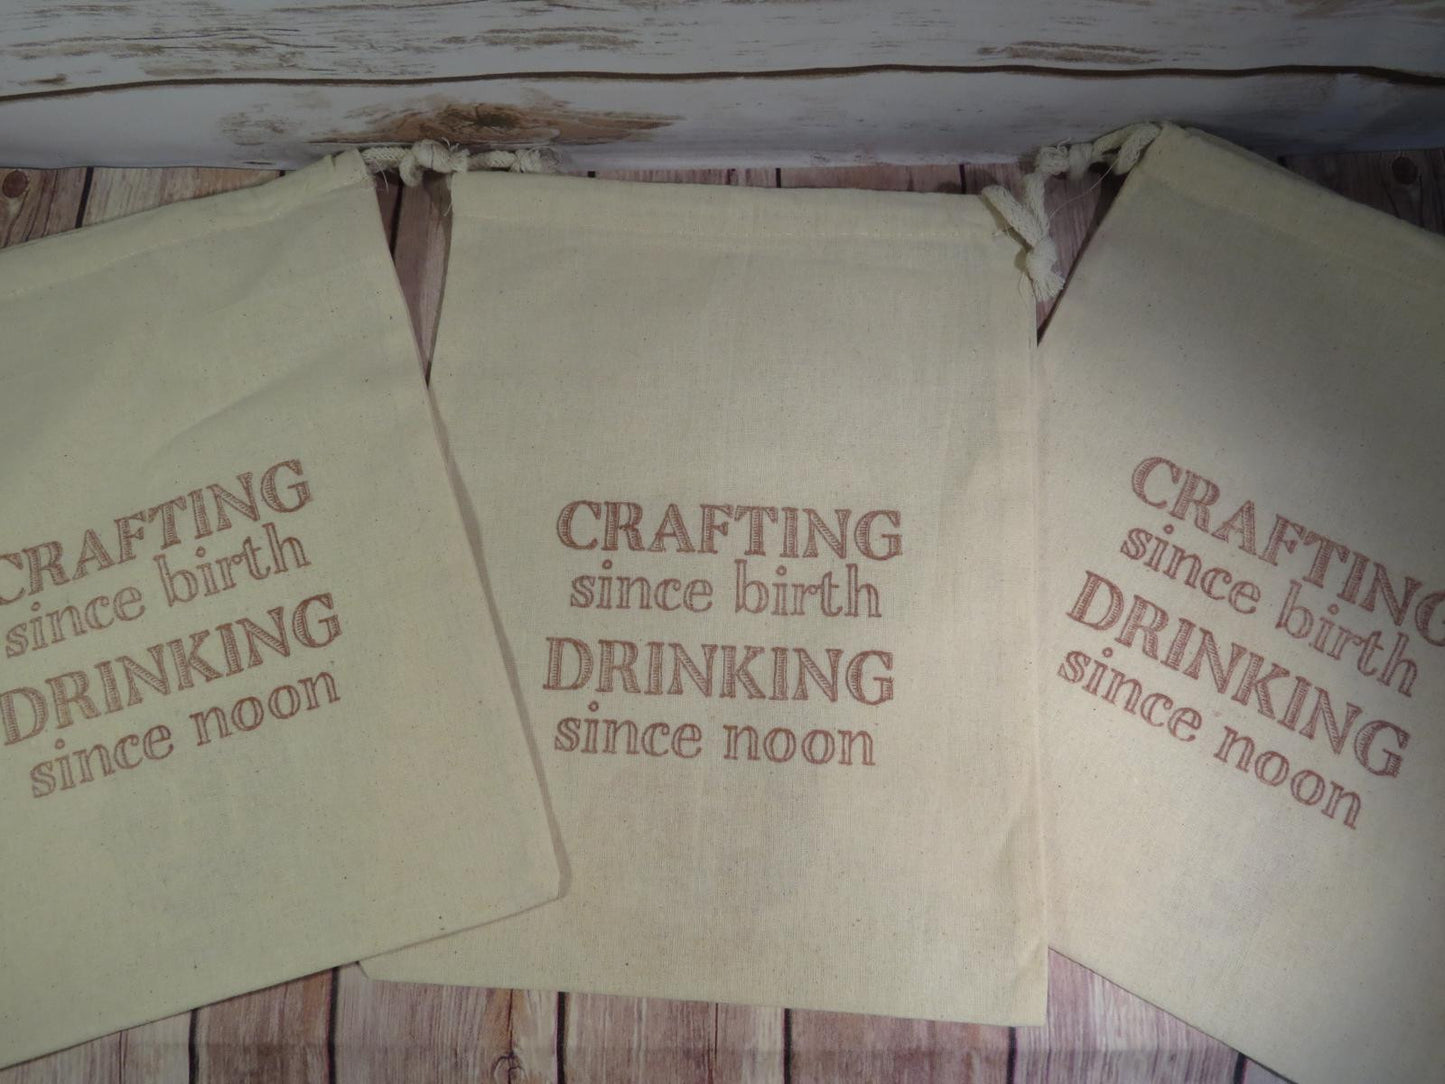 "Crafting Since Birth" project bag